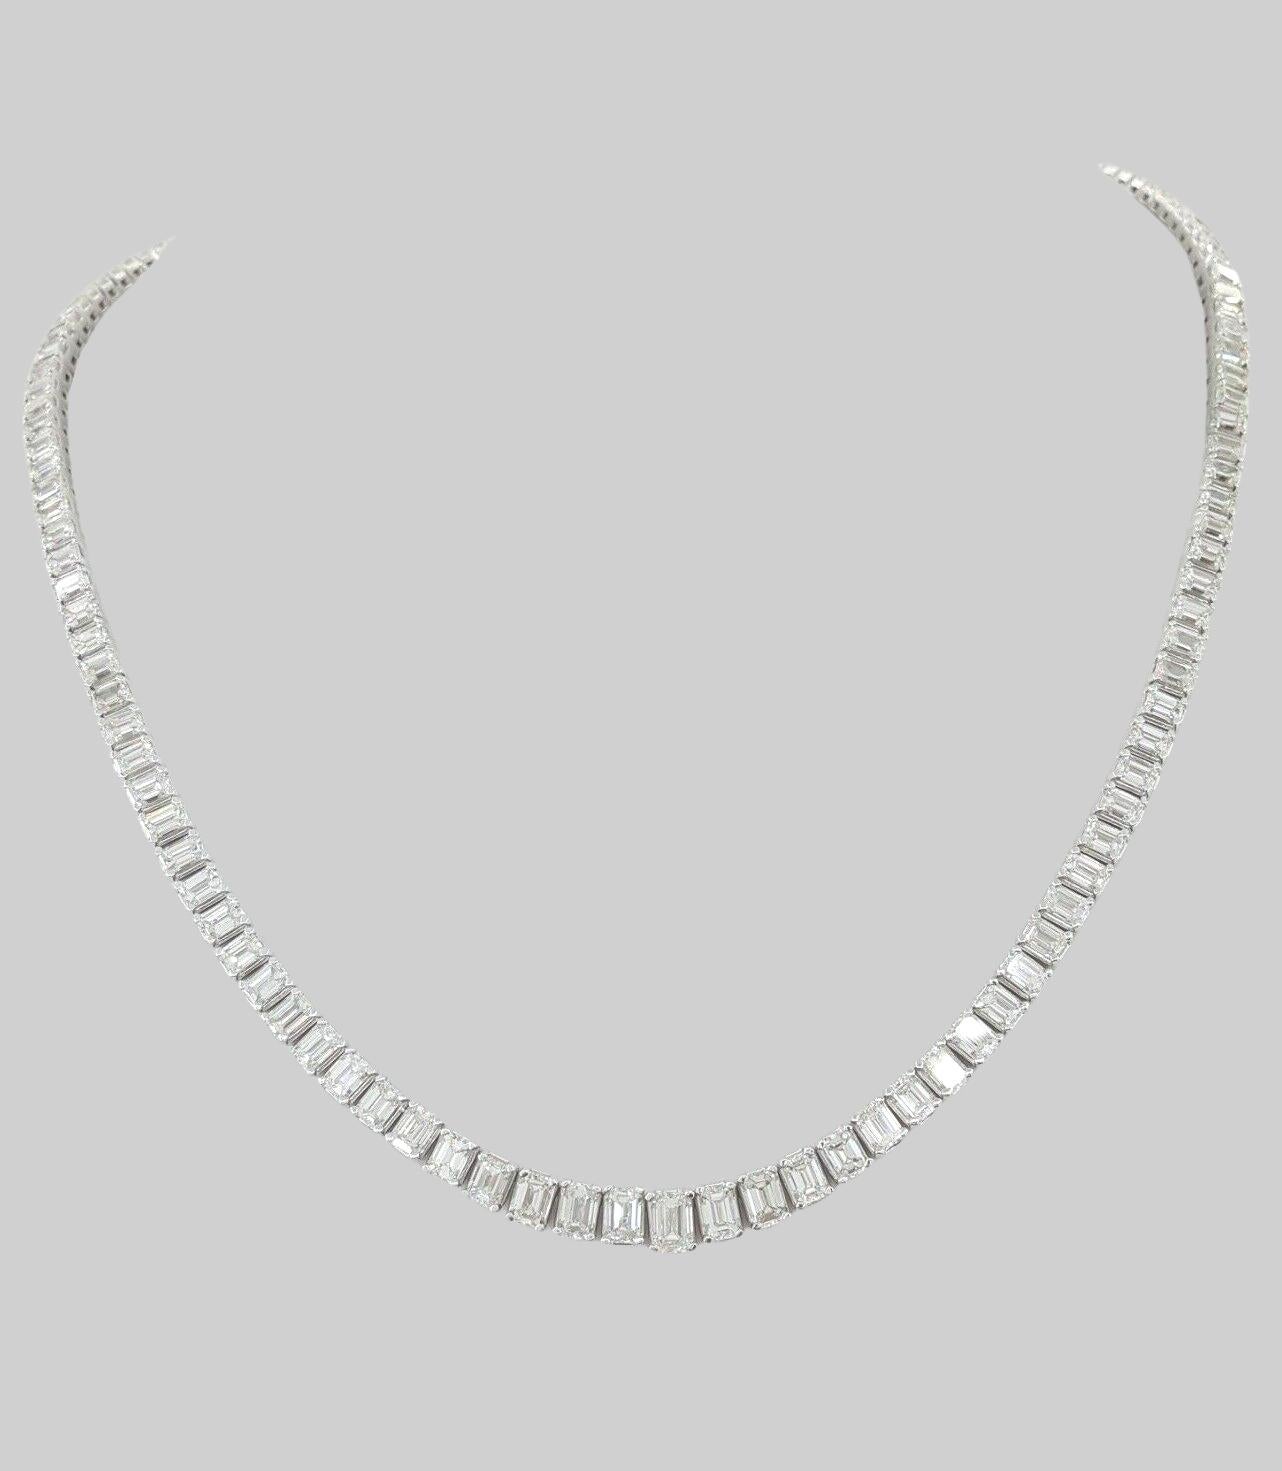 24 carat white gold necklace